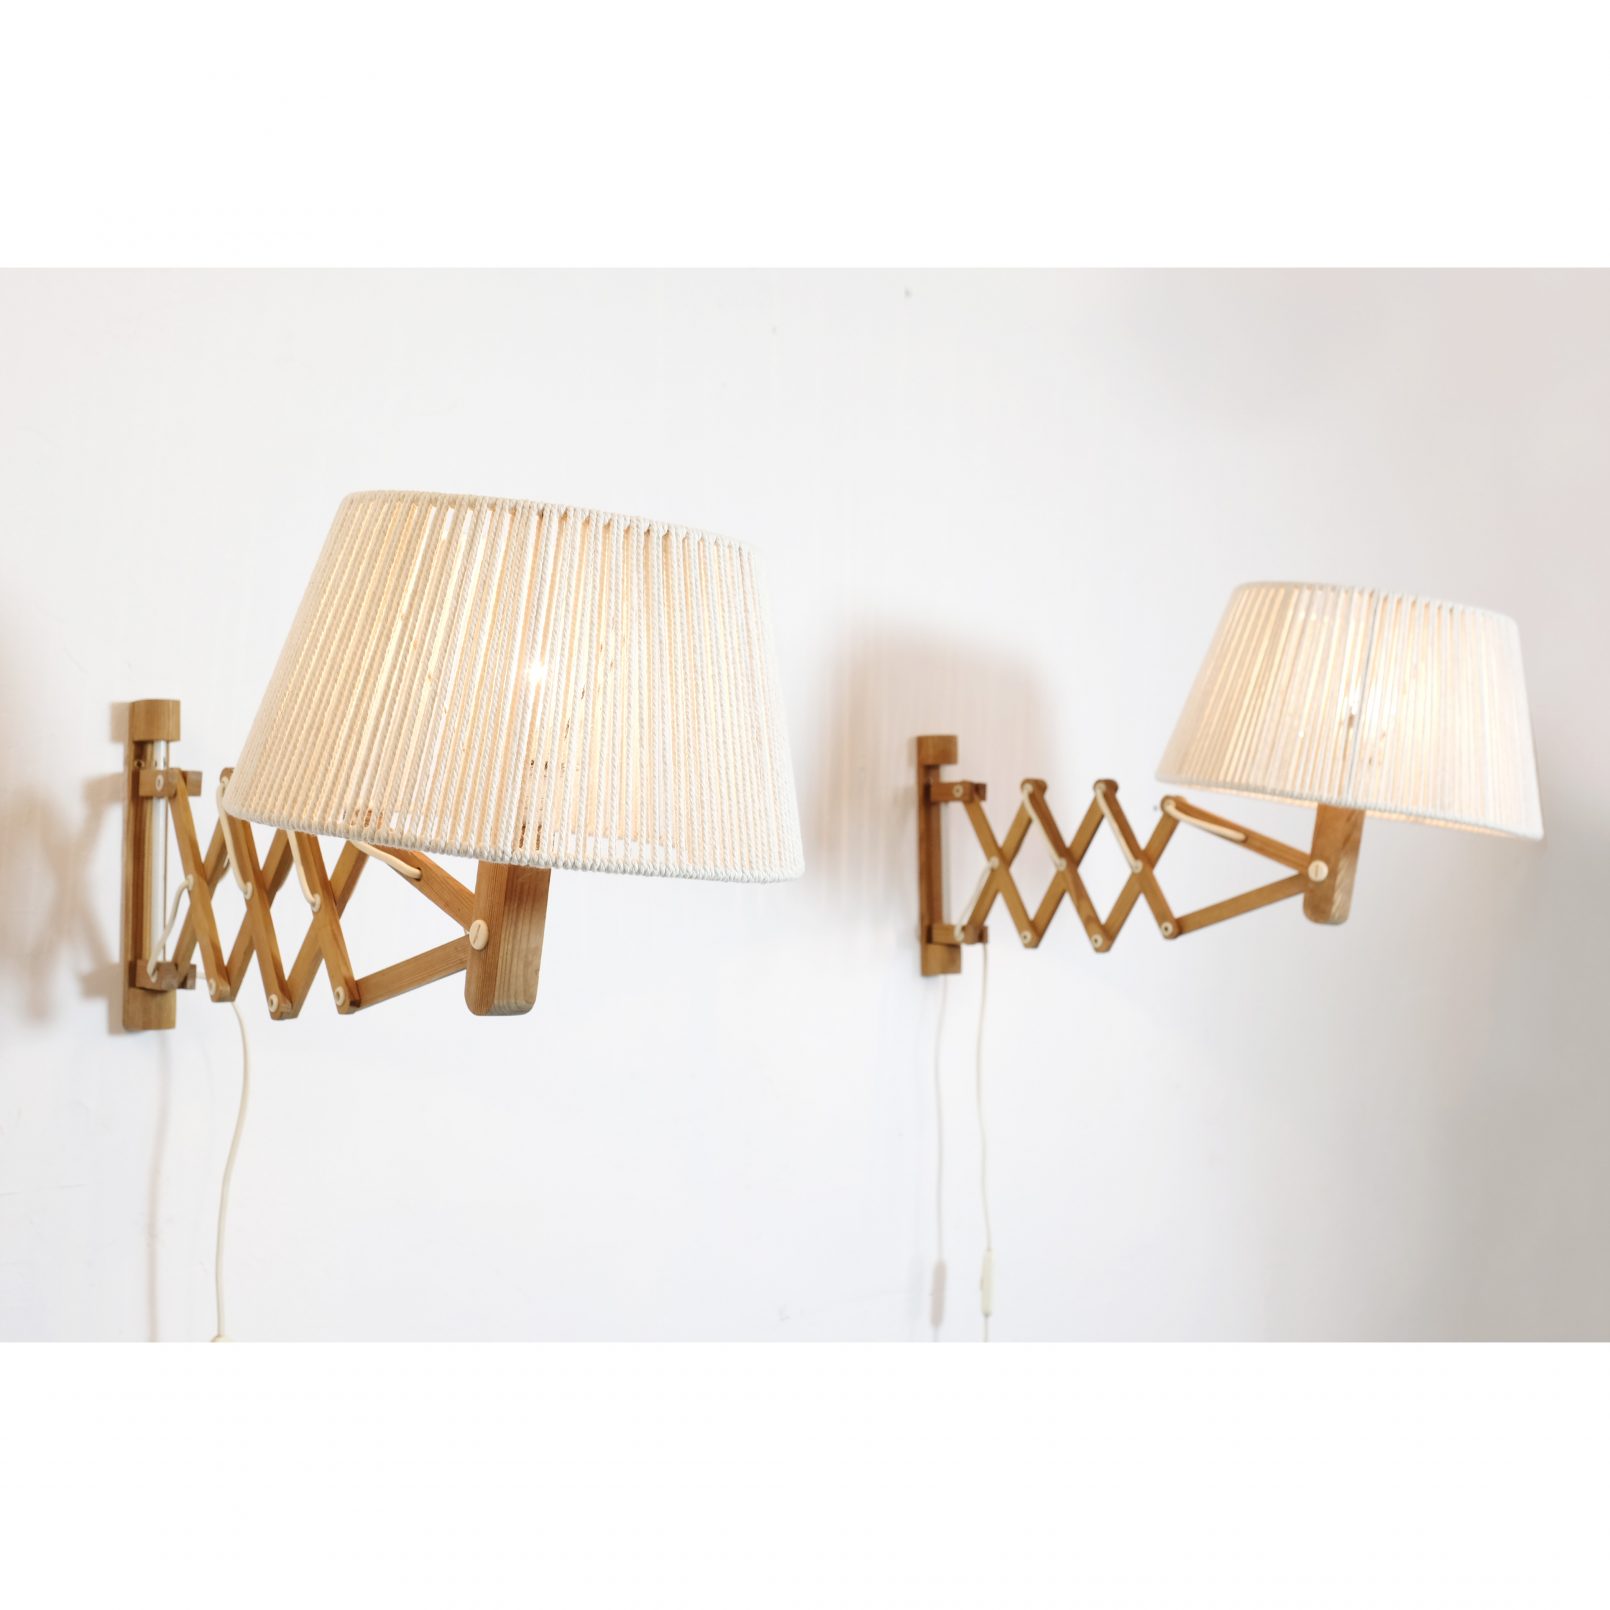 Pair of wooden wall mounted scissor lamps with cotton shades.